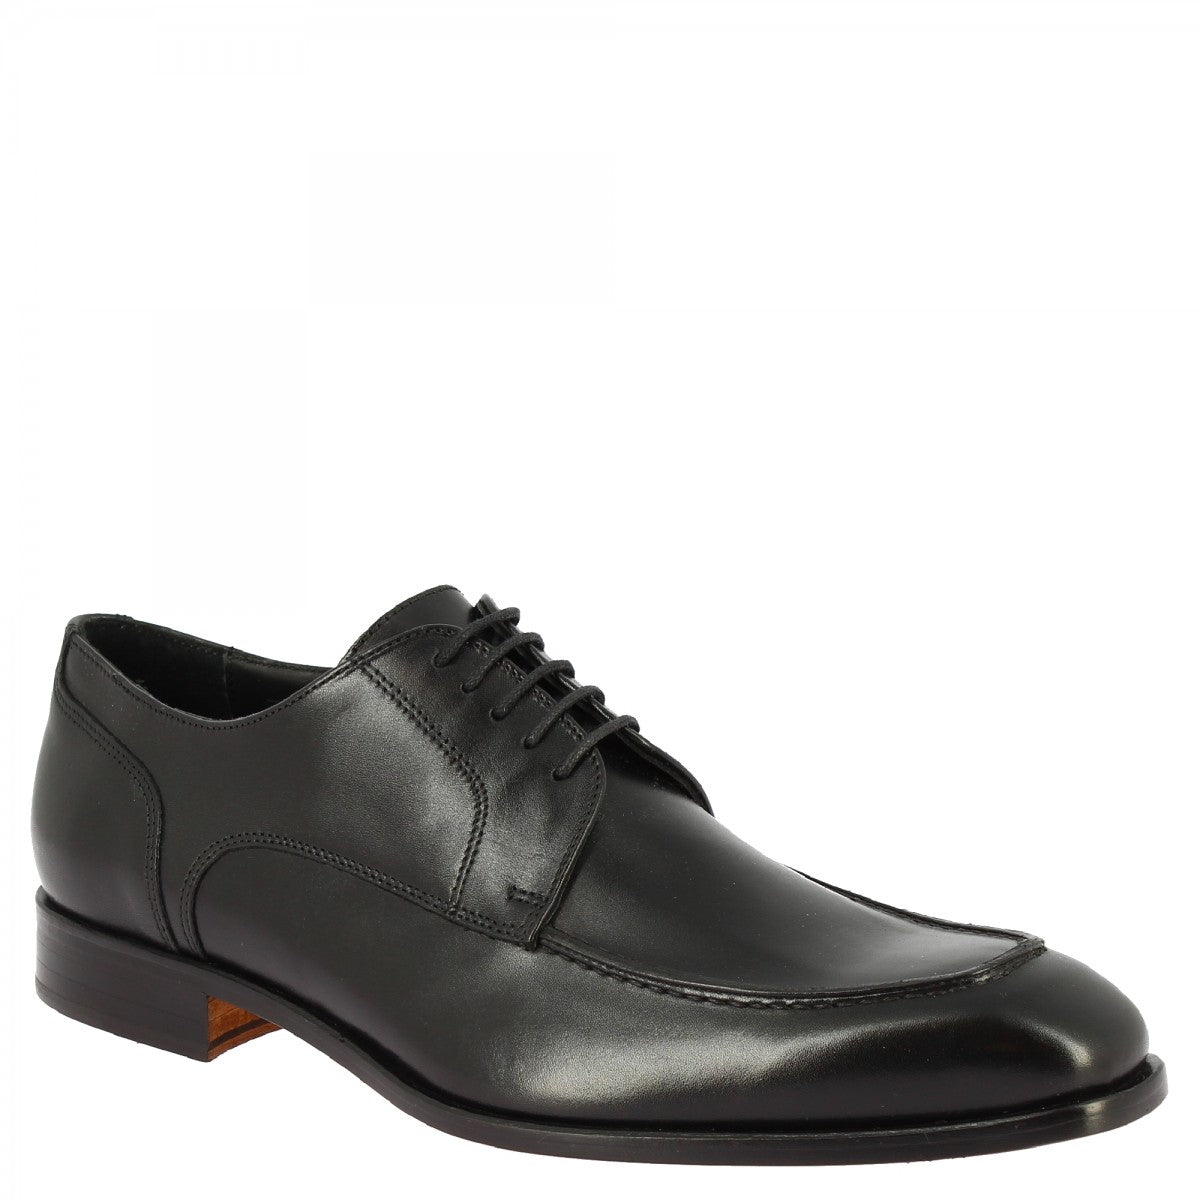 Men's handmade lace-up shoes in black calf leather